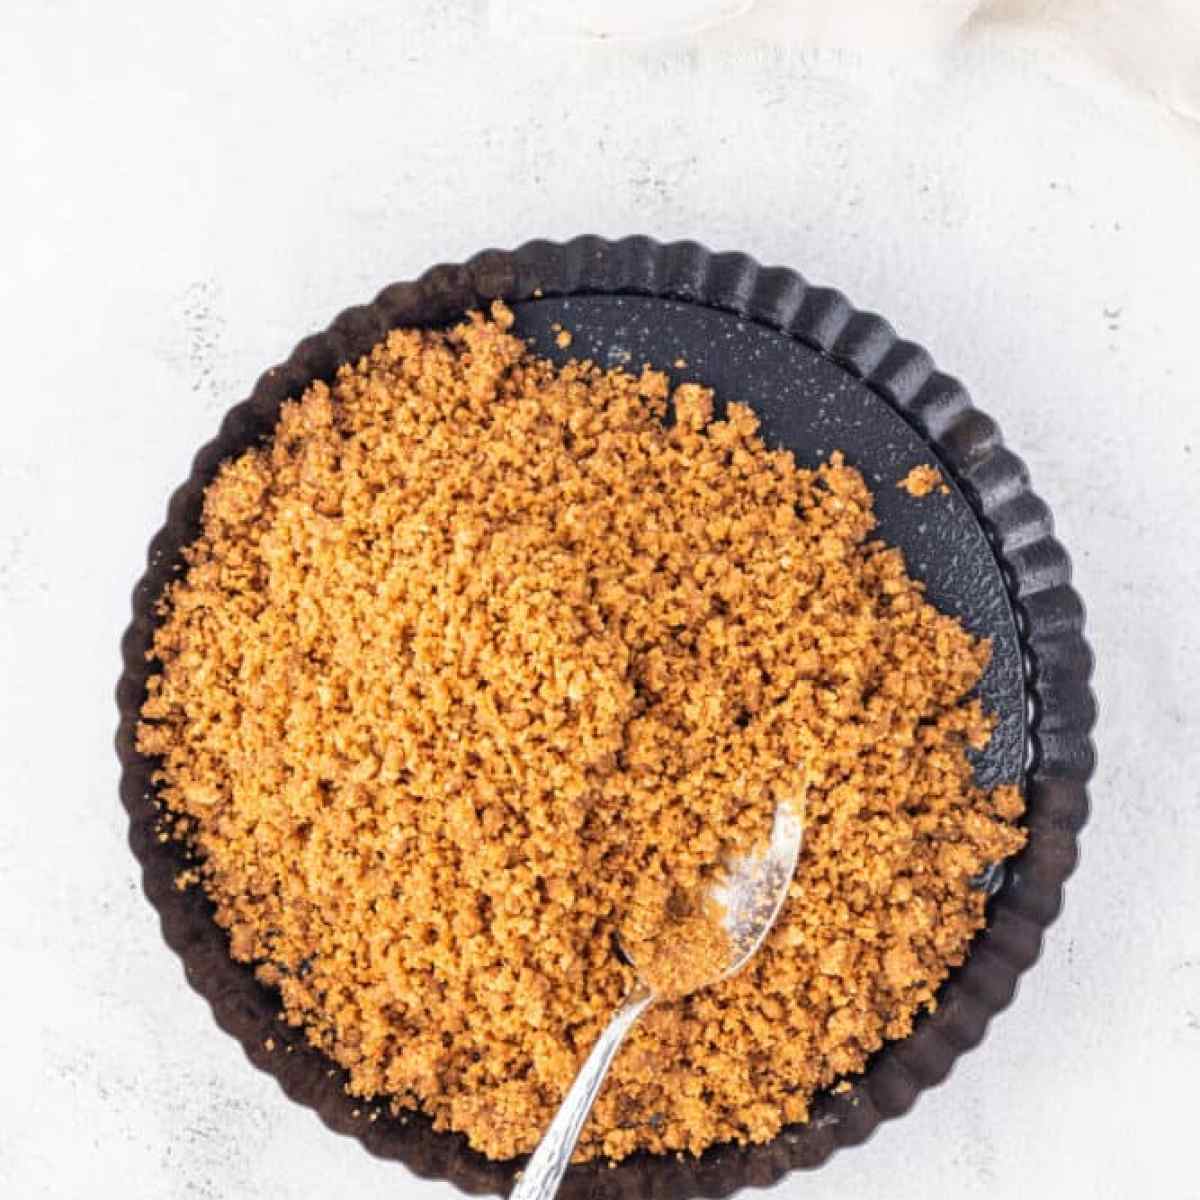 A bowl of brown sugar with a spoon on top, alongside an eggnog tart.